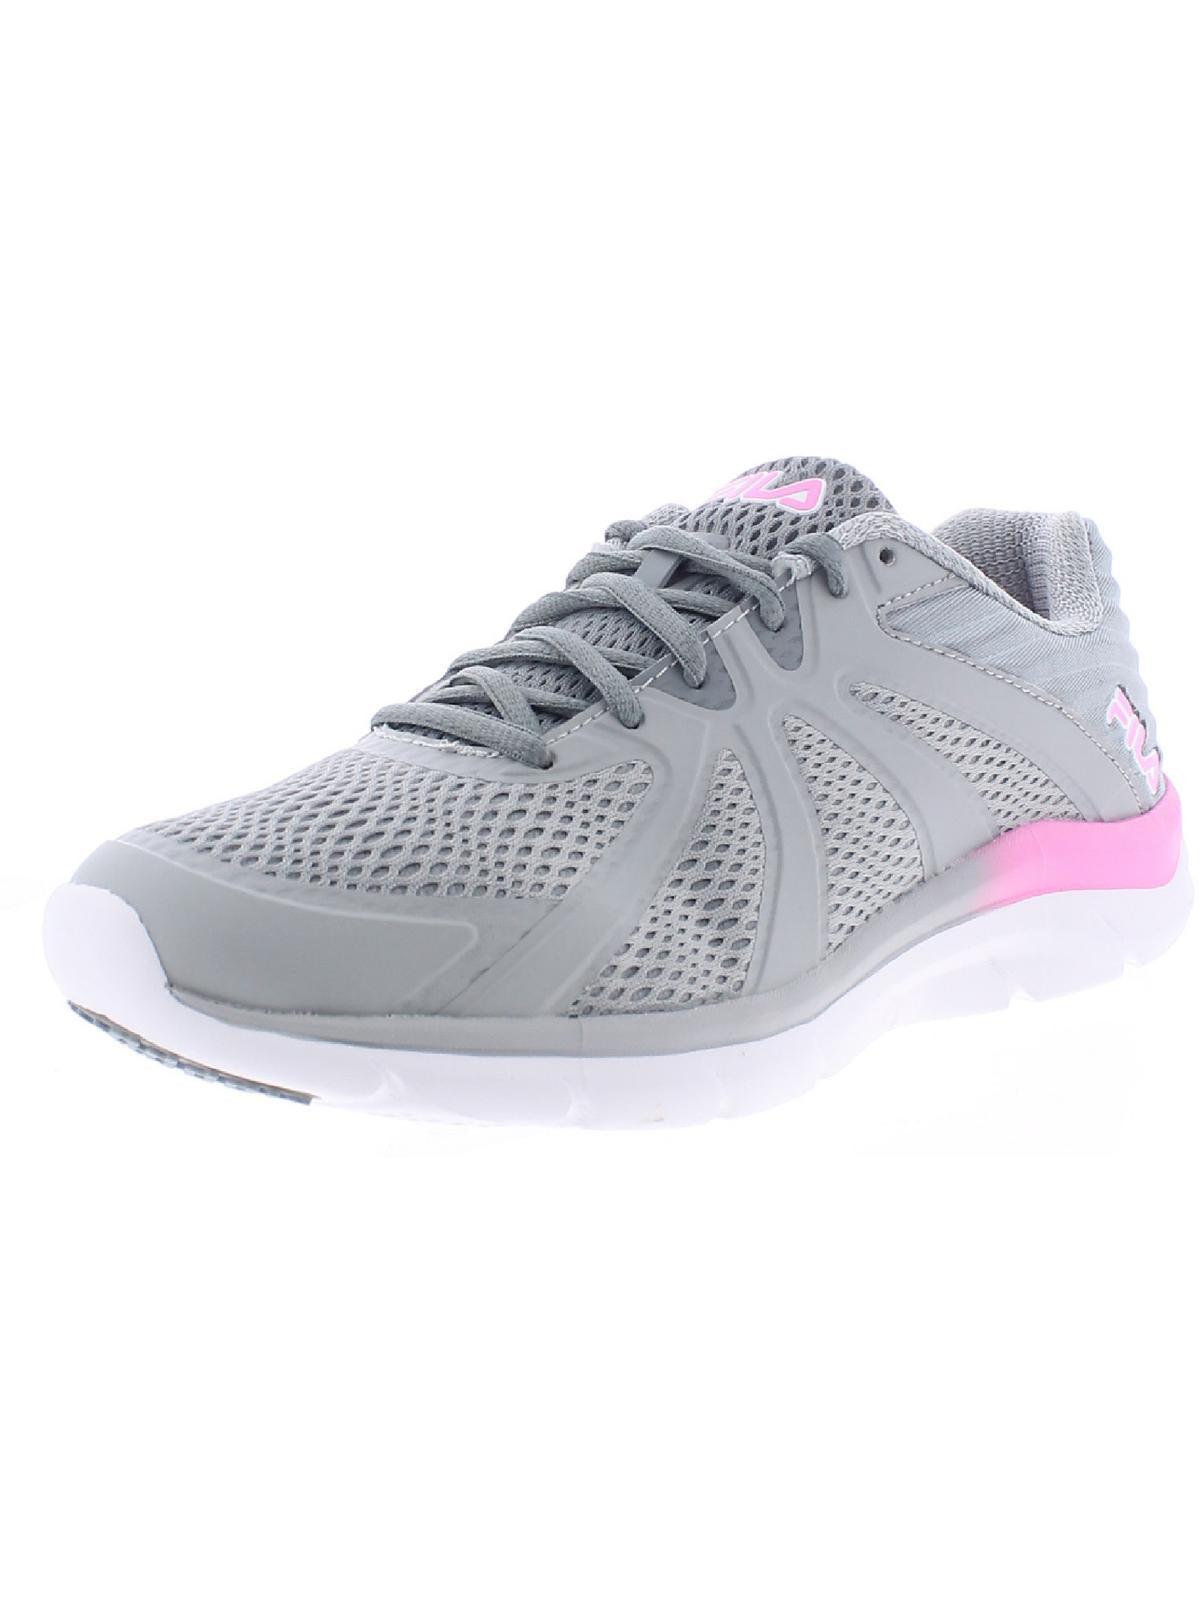 Fila Memory Fraction 3 Fitness Lace-up Running Shoes in Gray | Lyst